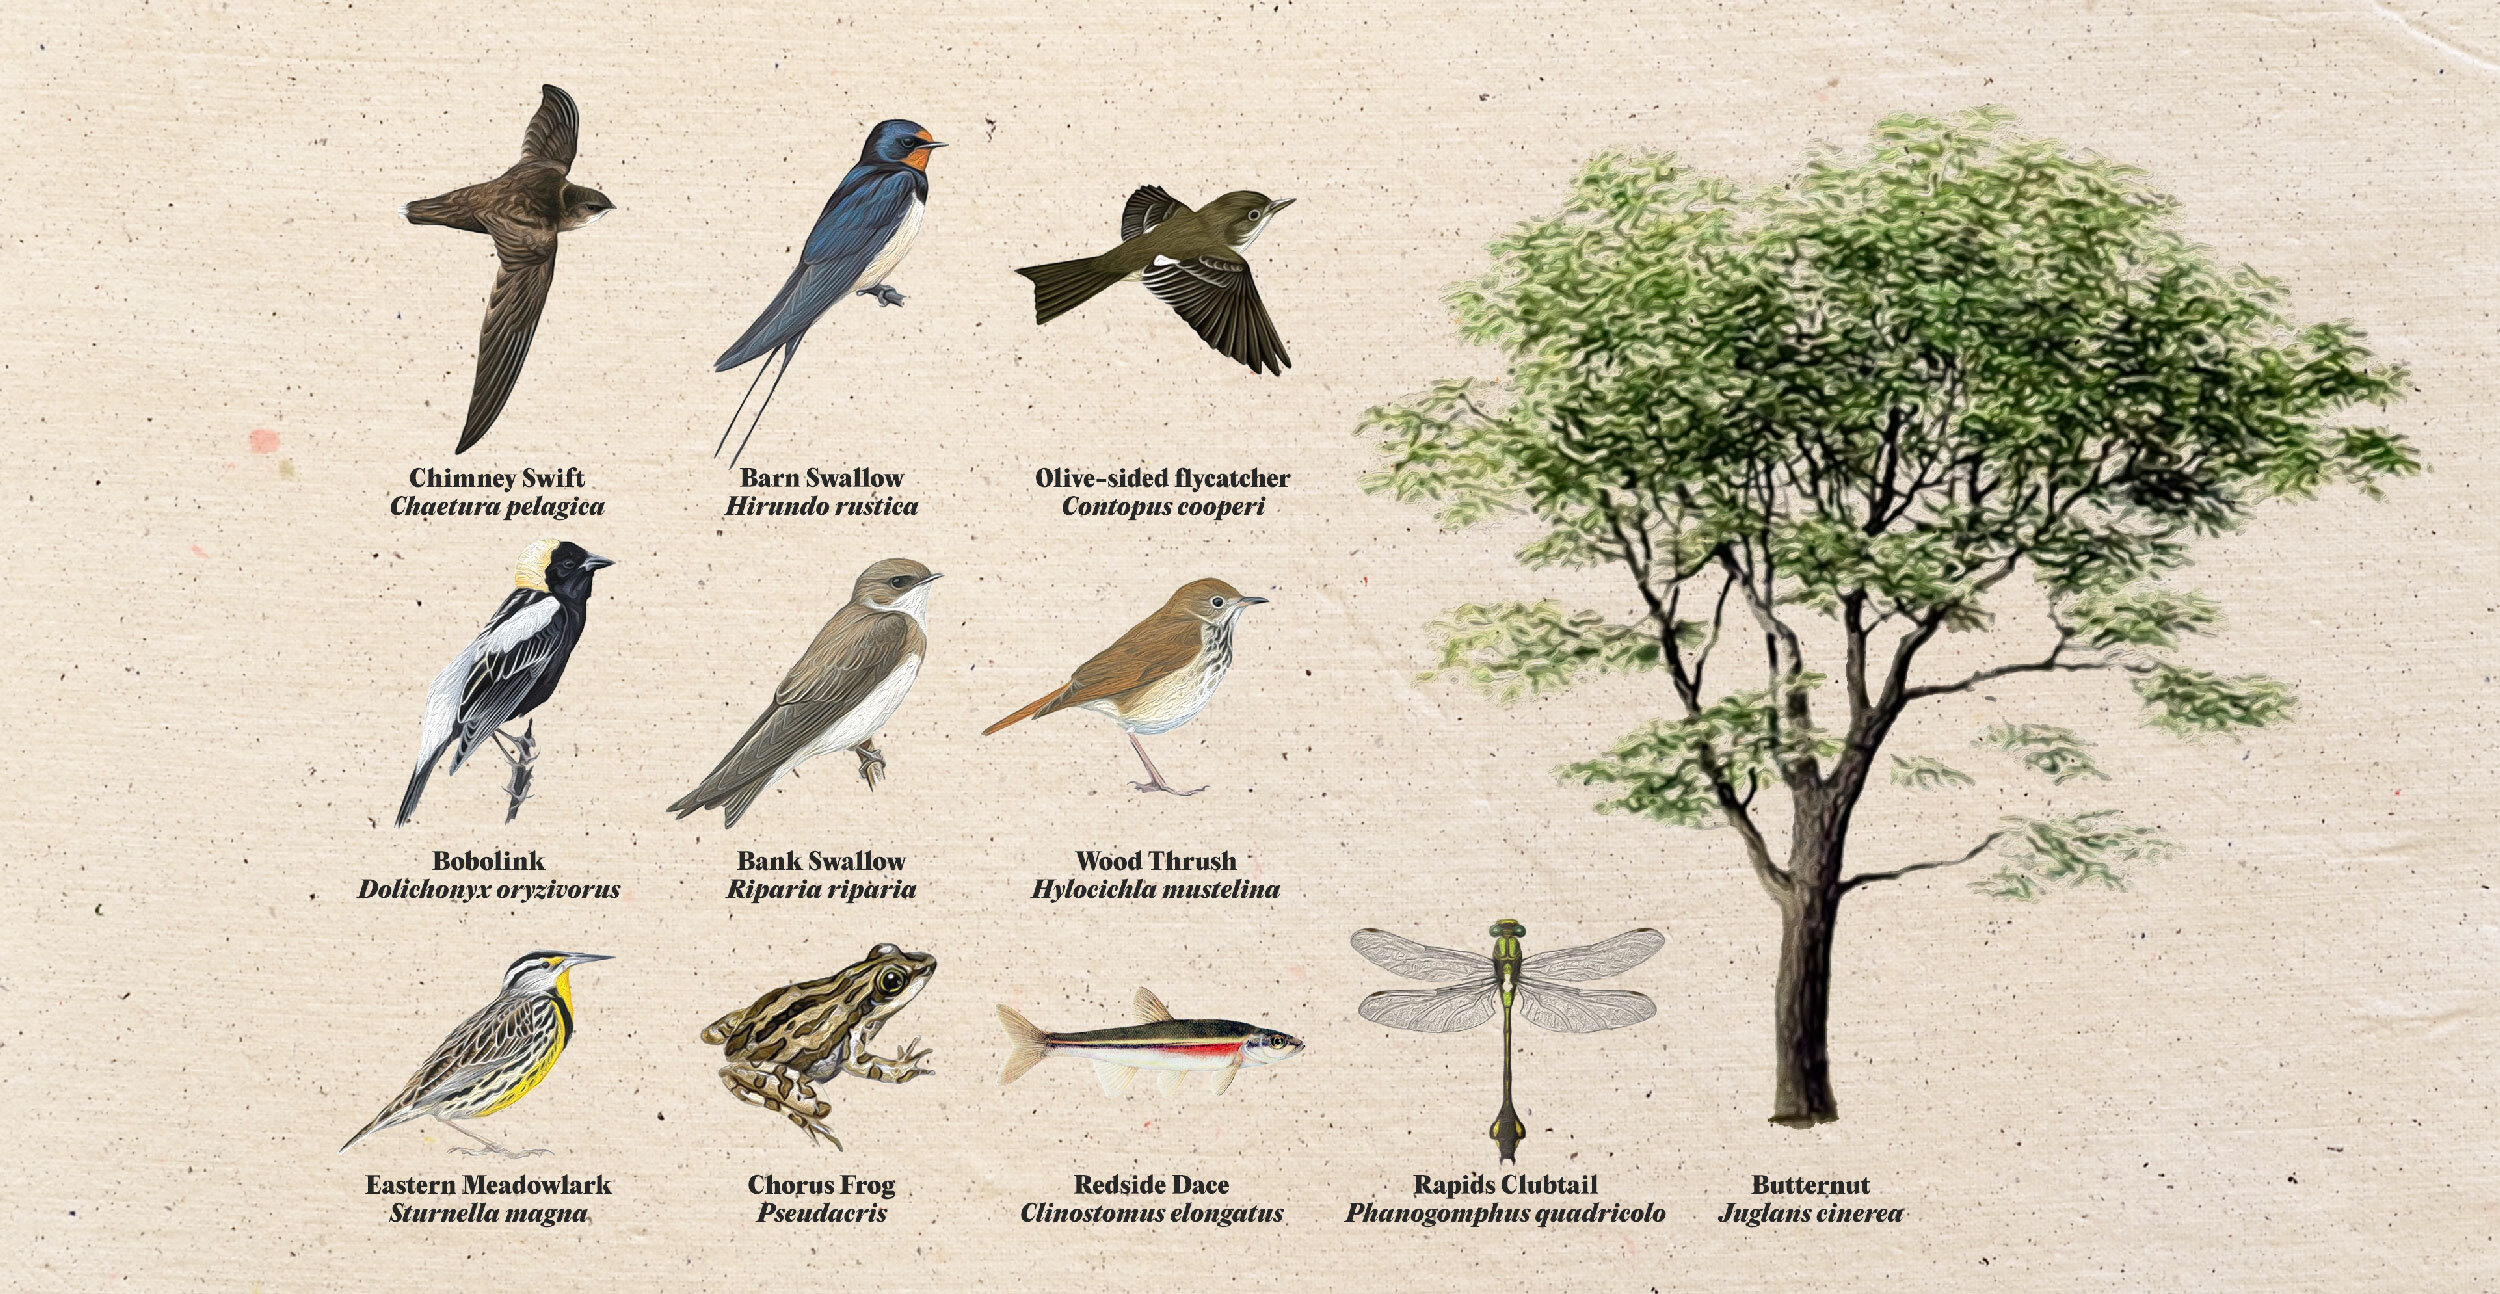 Illustrations of 11 species, labelled with their latin names: the chimney swift, barn swallow, olive-sided flycatcher, bobolink, bank swallow, wood thrush, eastern meadowlark, chorus frog, redside dace, rapids clubtail and butternut tree.